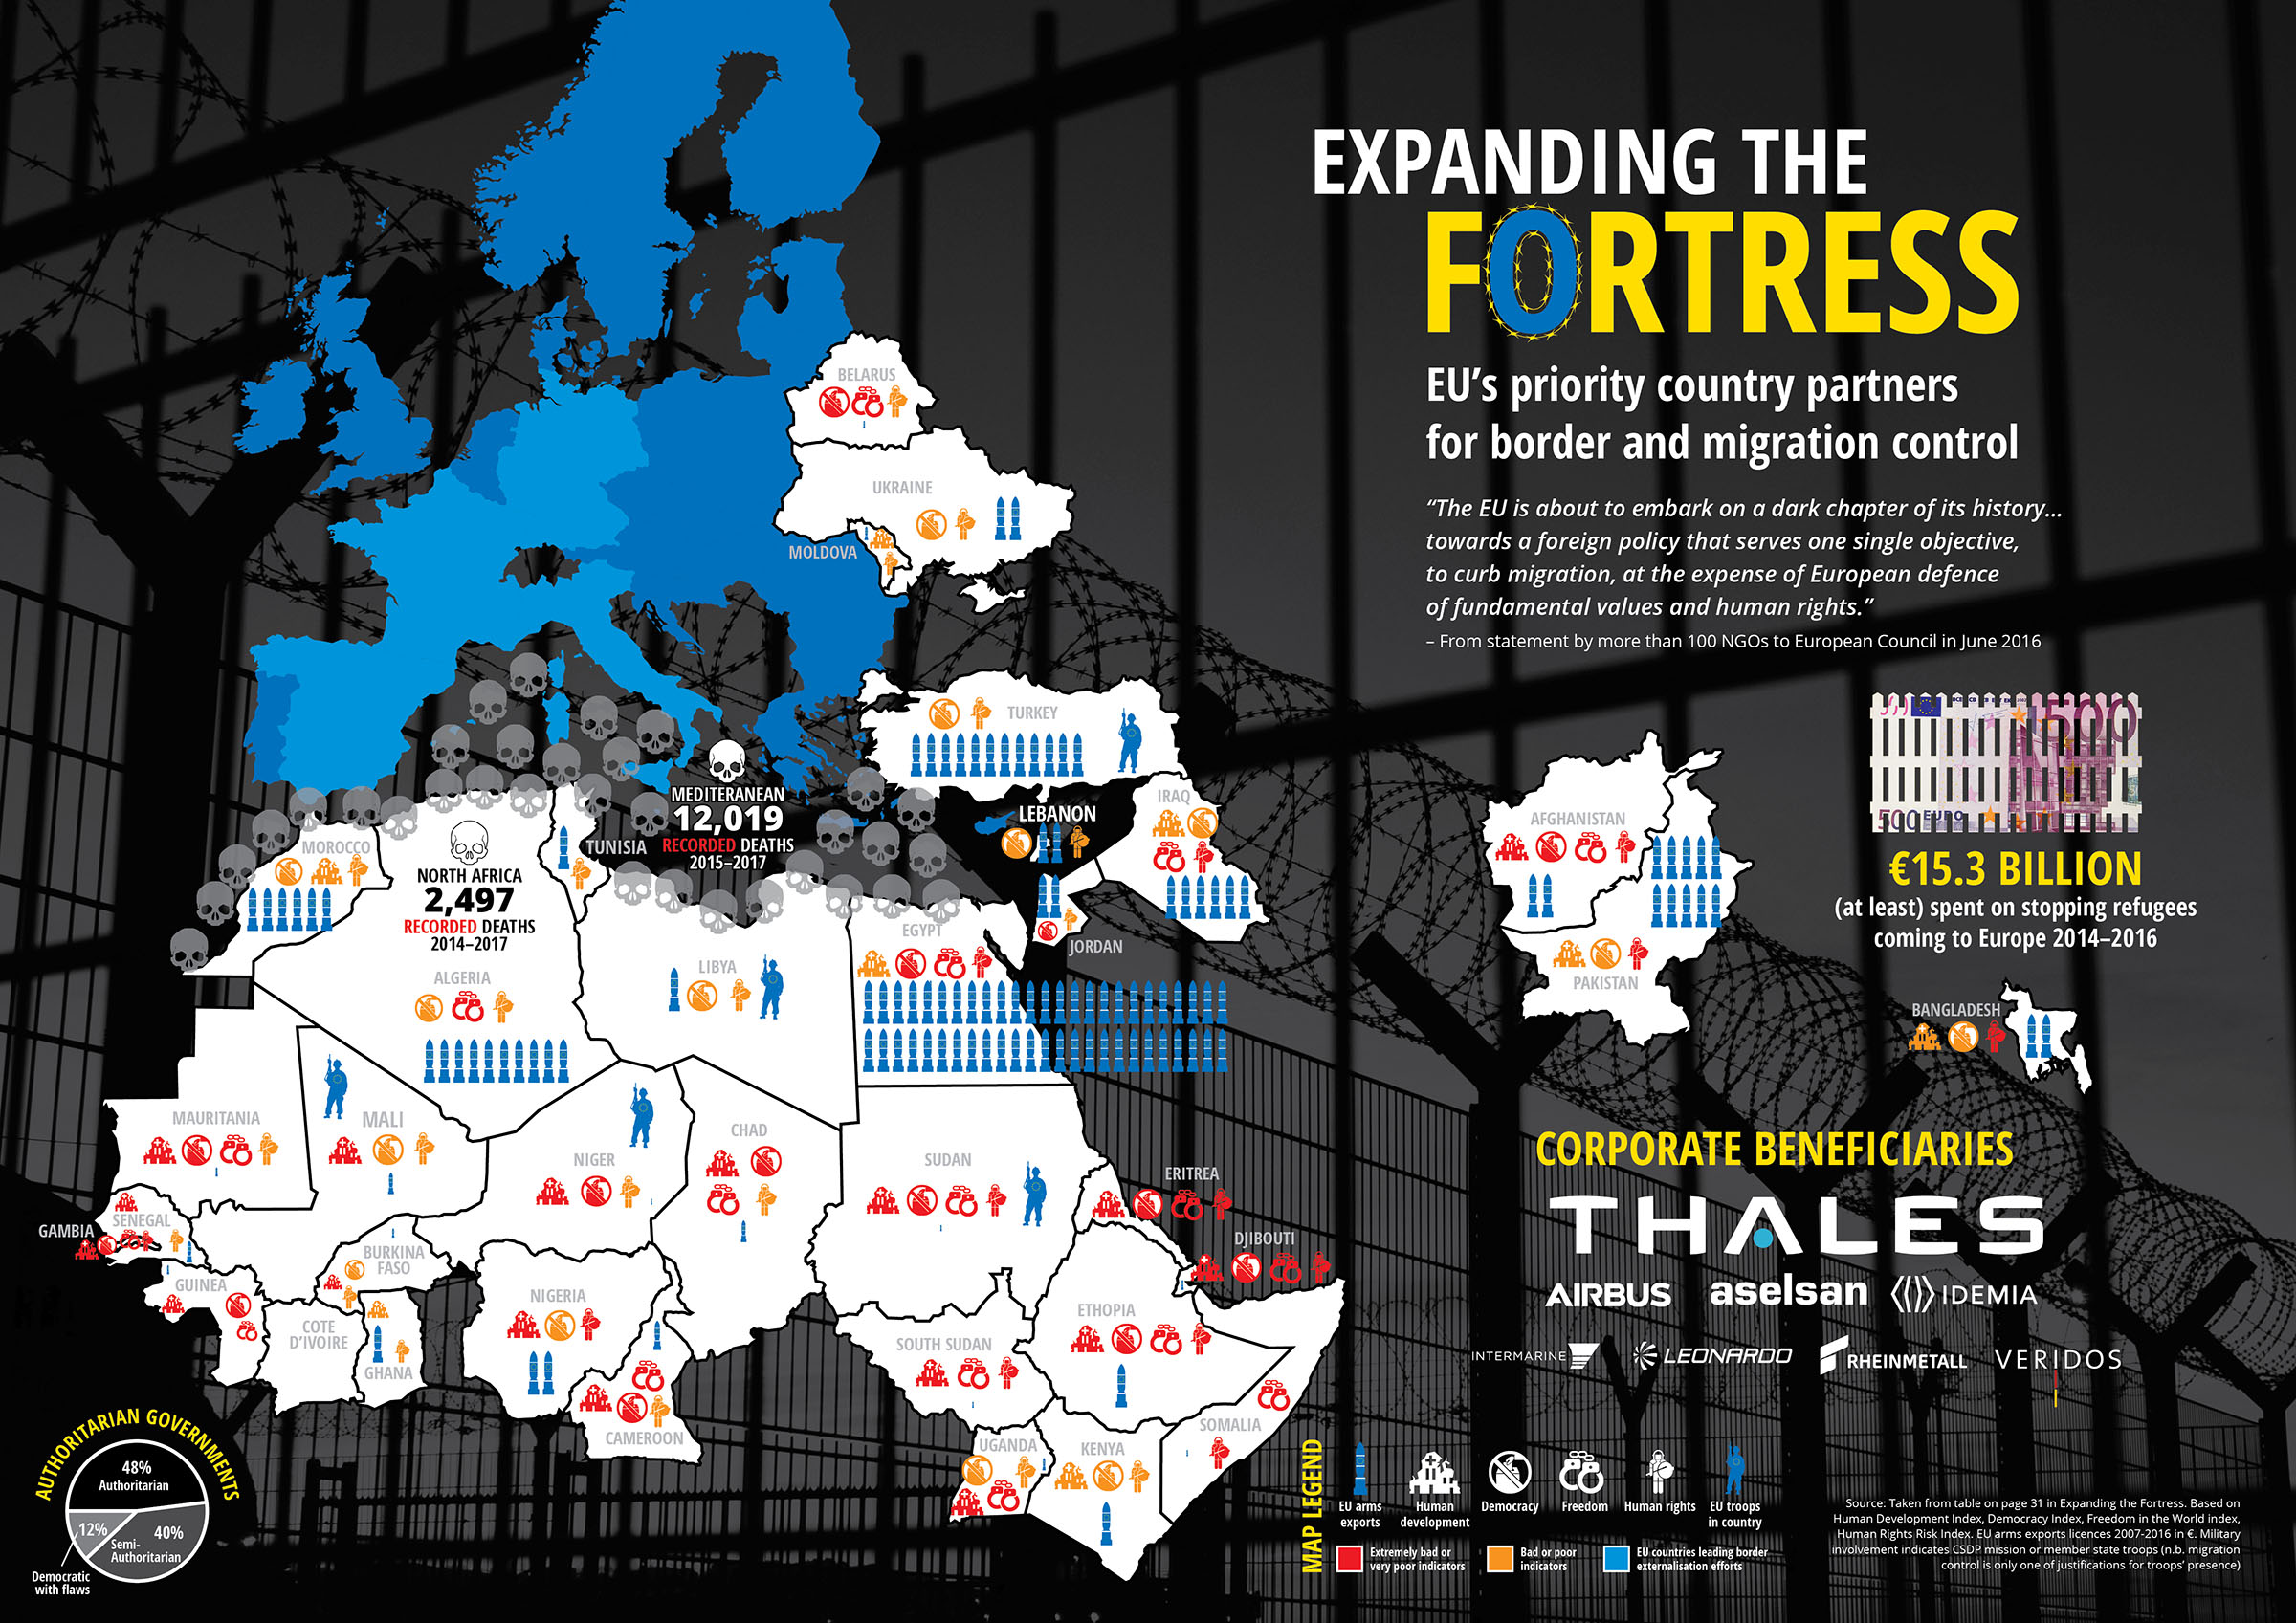 https://www.tni.org/files/expanding_the_fortress_-_infographic.jpg